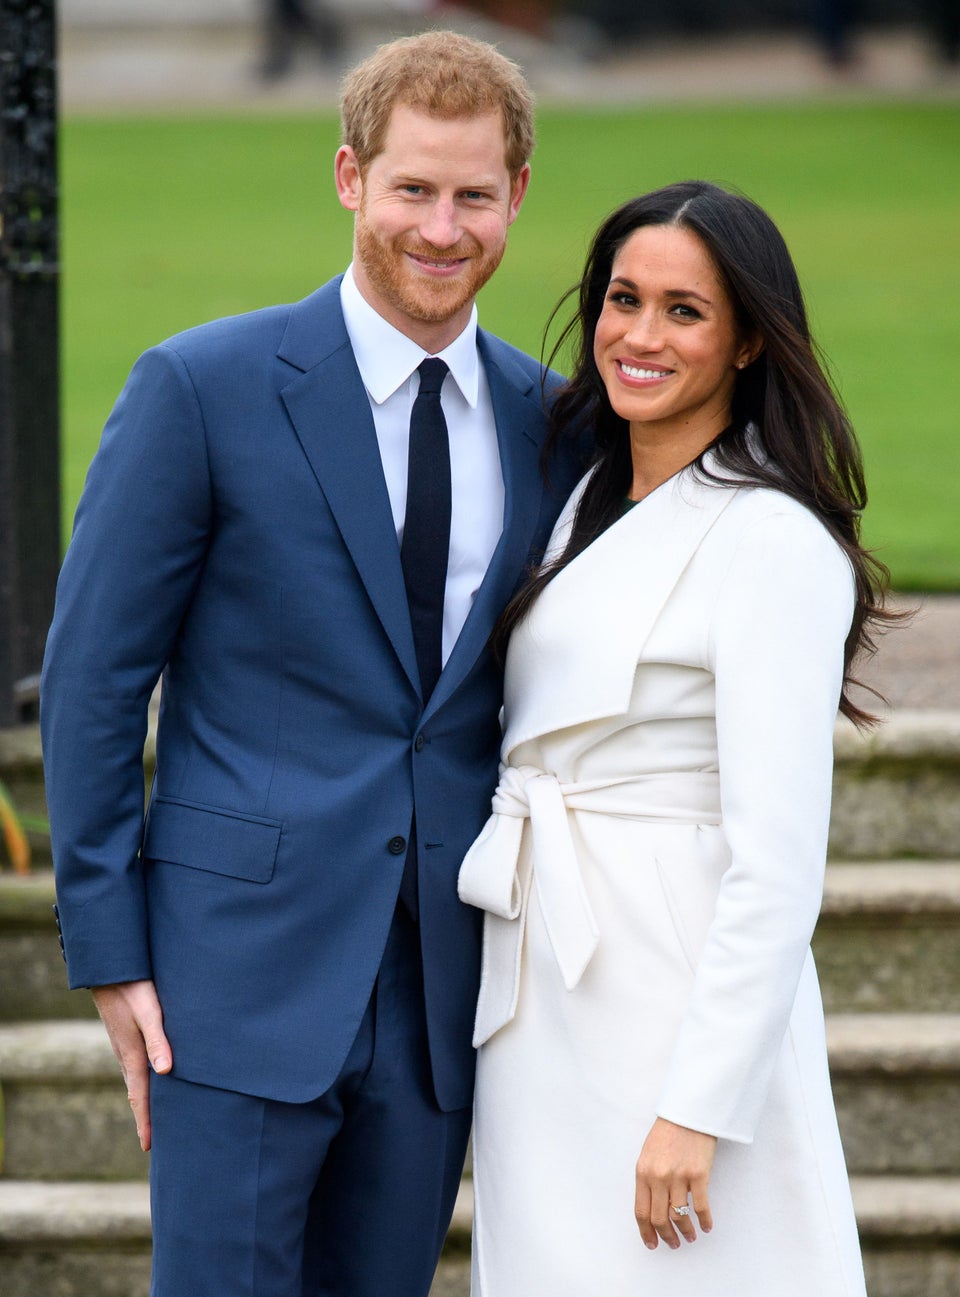 Prince Harry And Meghan Markle Extend Wedding Invite To The Public